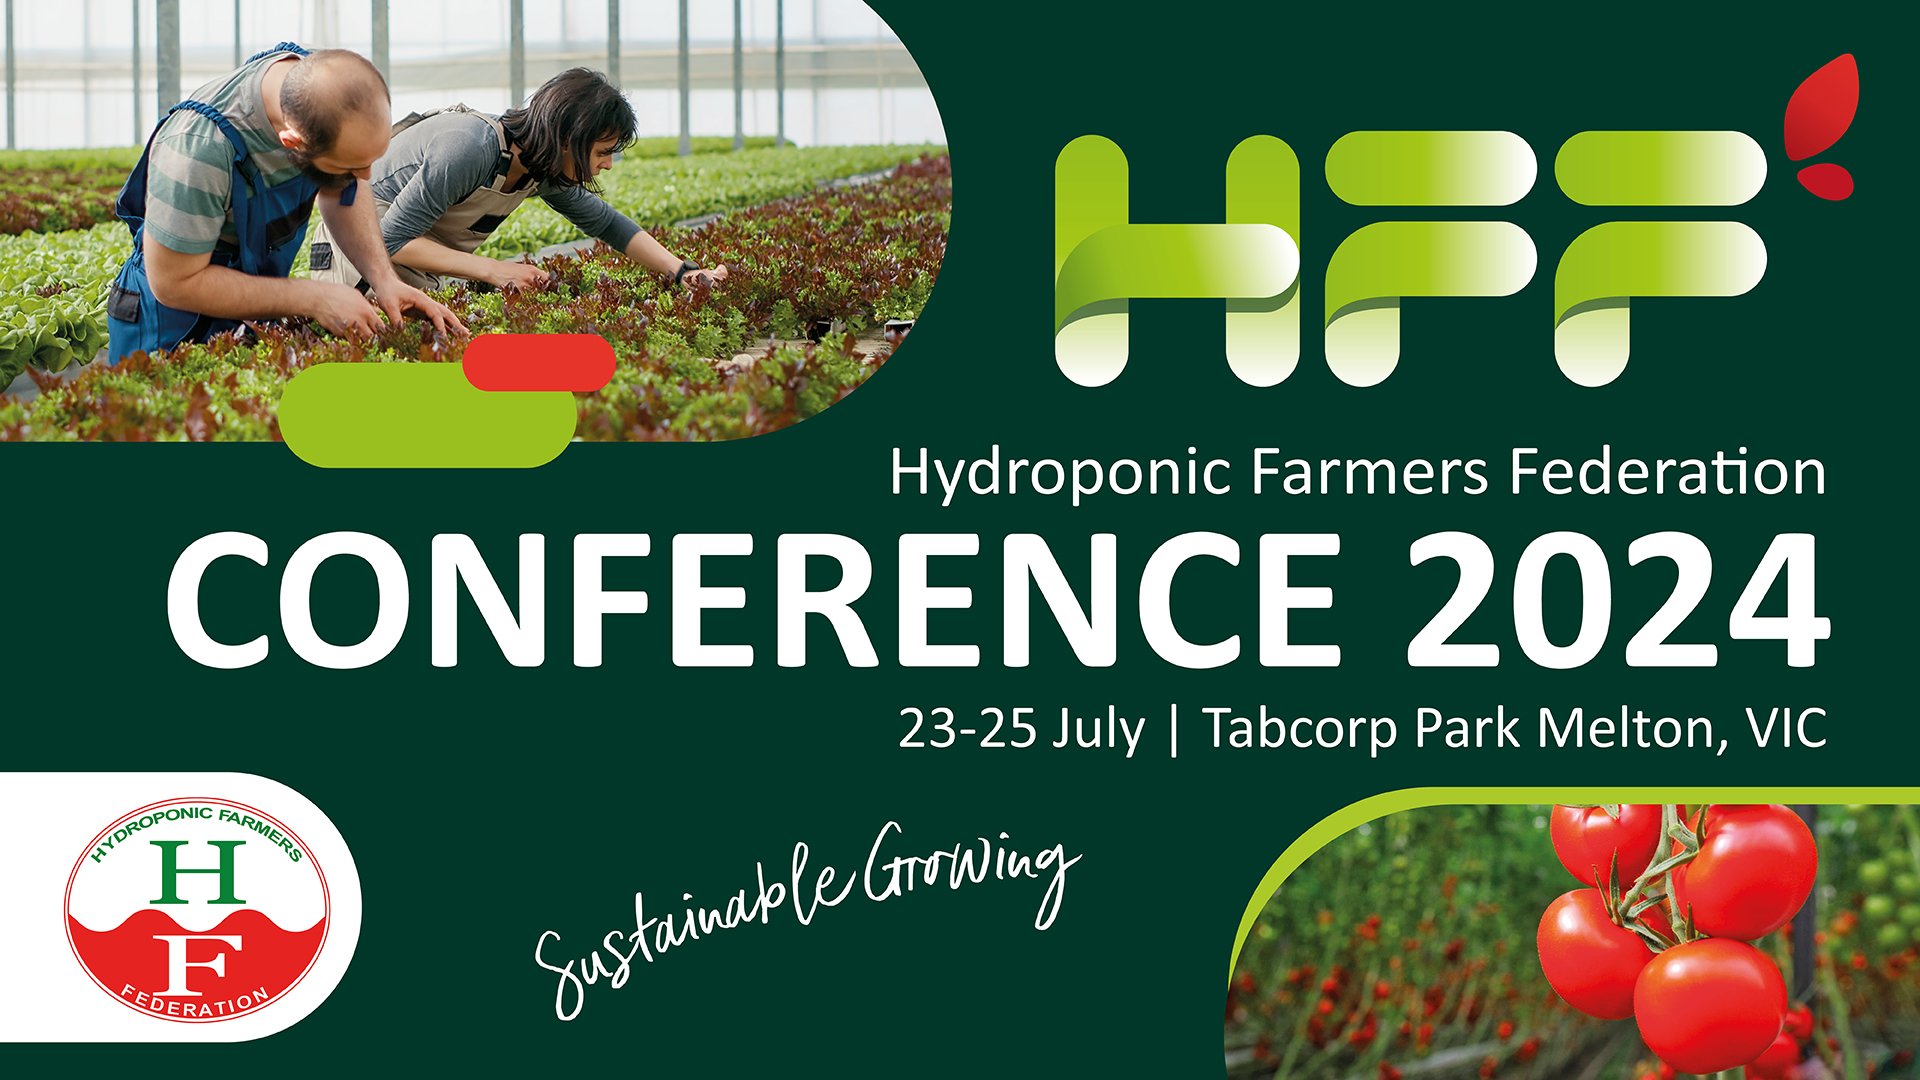 hydroponic farmers federation conference 2024. 23-25 July. Tabcorp Park Melton VIC.